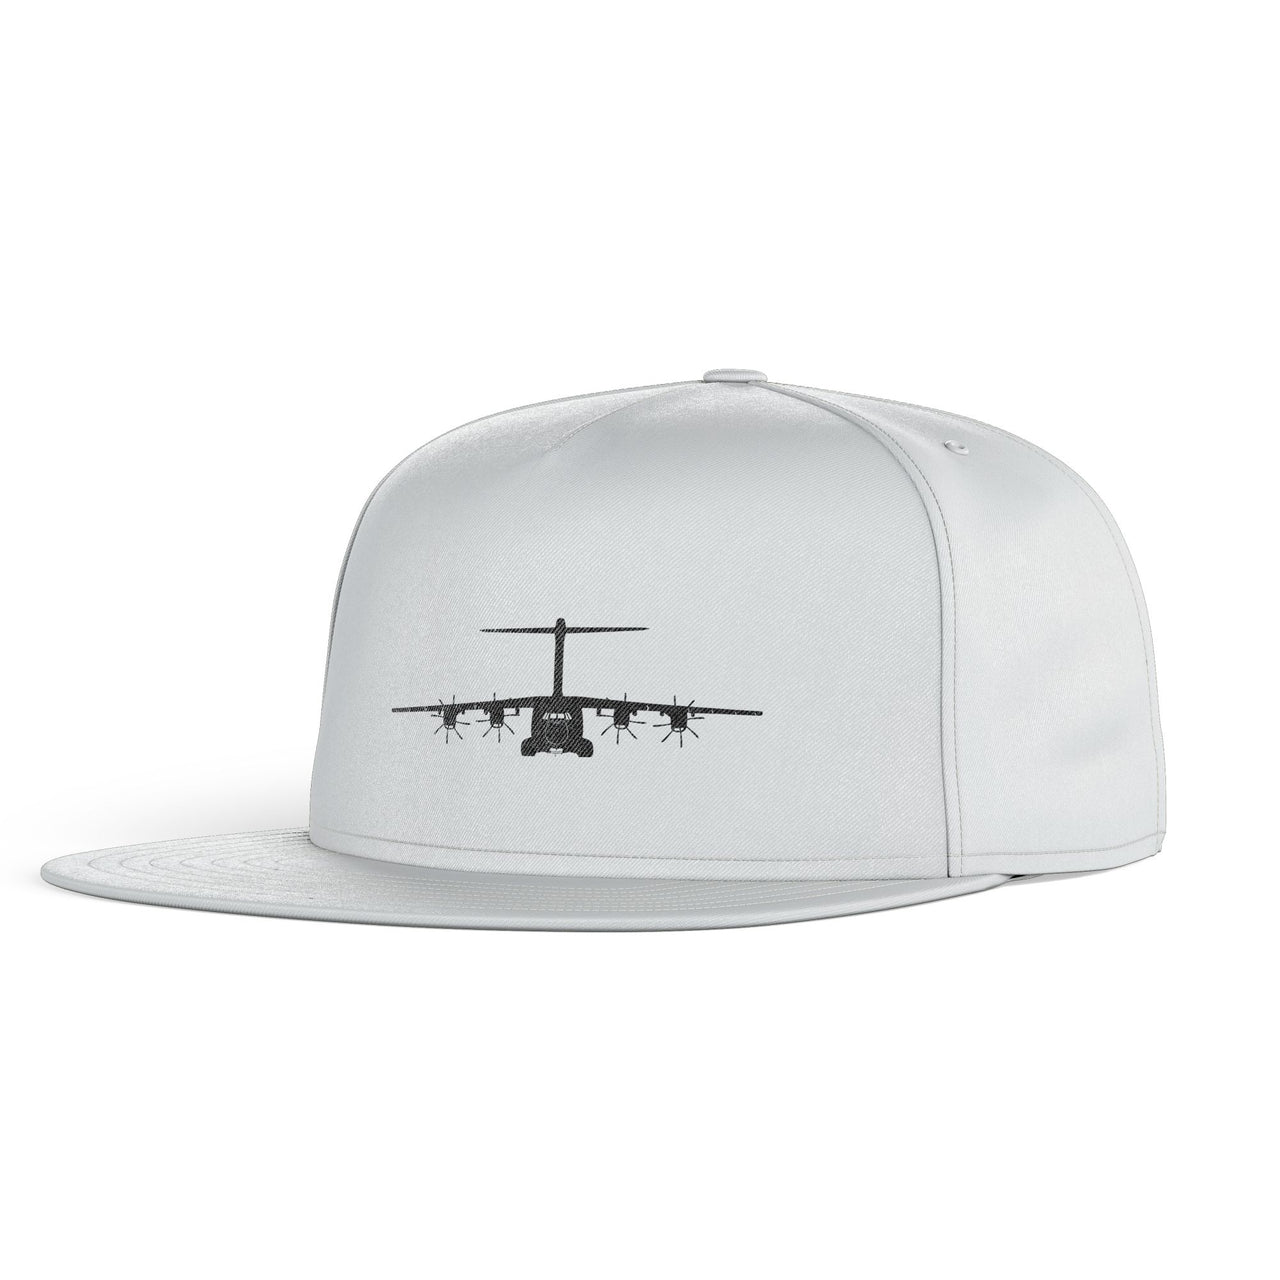 Airbus A400M Silhouette Designed Snapback Caps & Hats